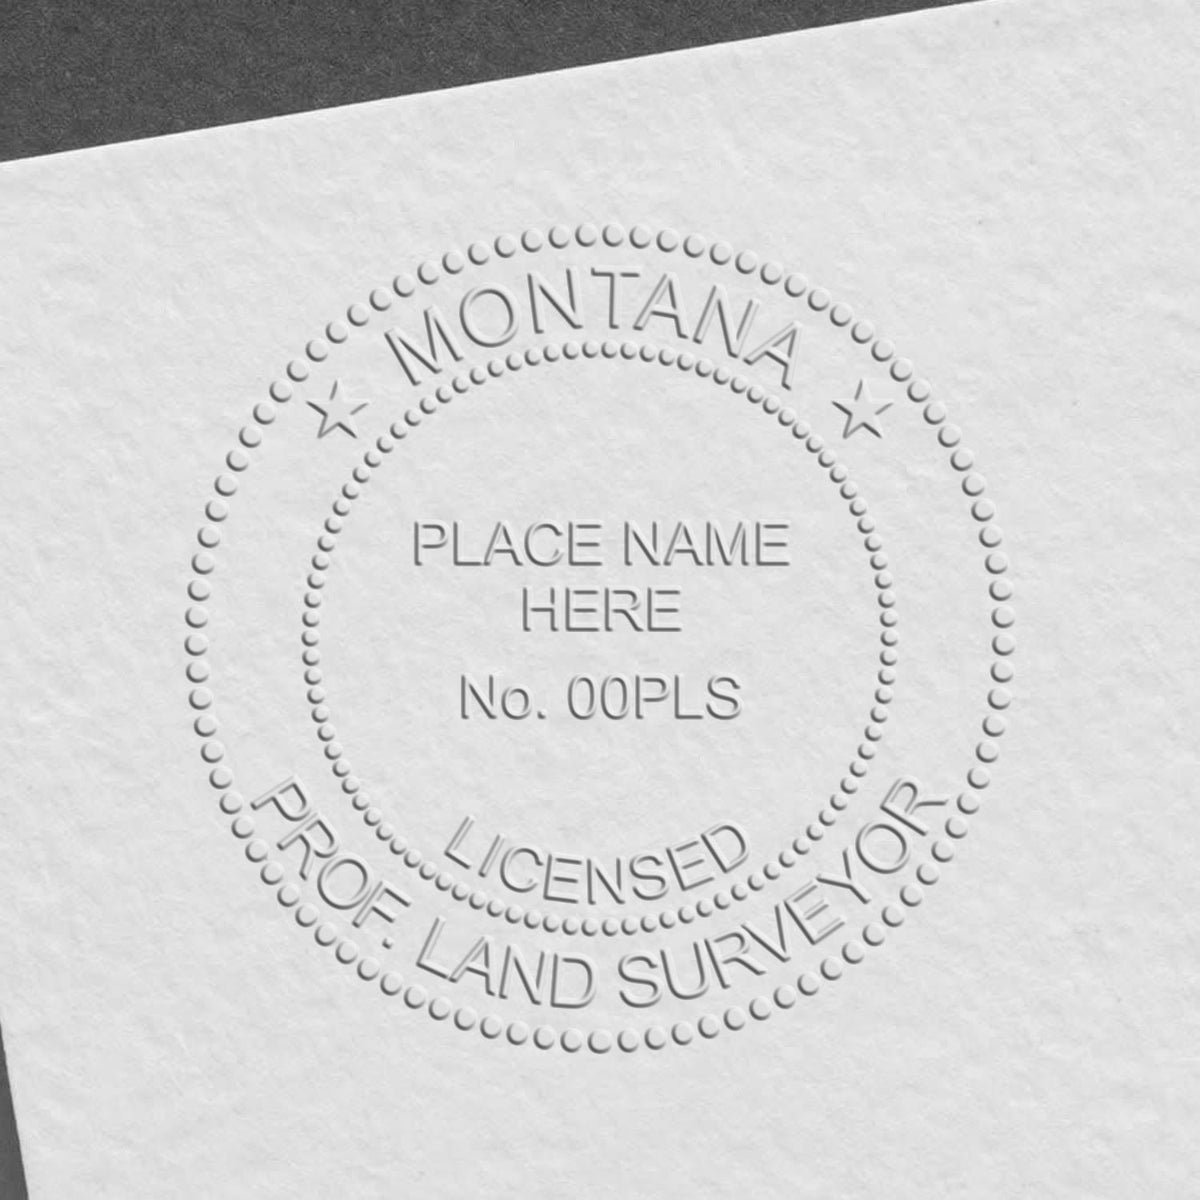 The Gift Montana Land Surveyor Seal stamp impression comes to life with a crisp, detailed image stamped on paper - showcasing true professional quality.